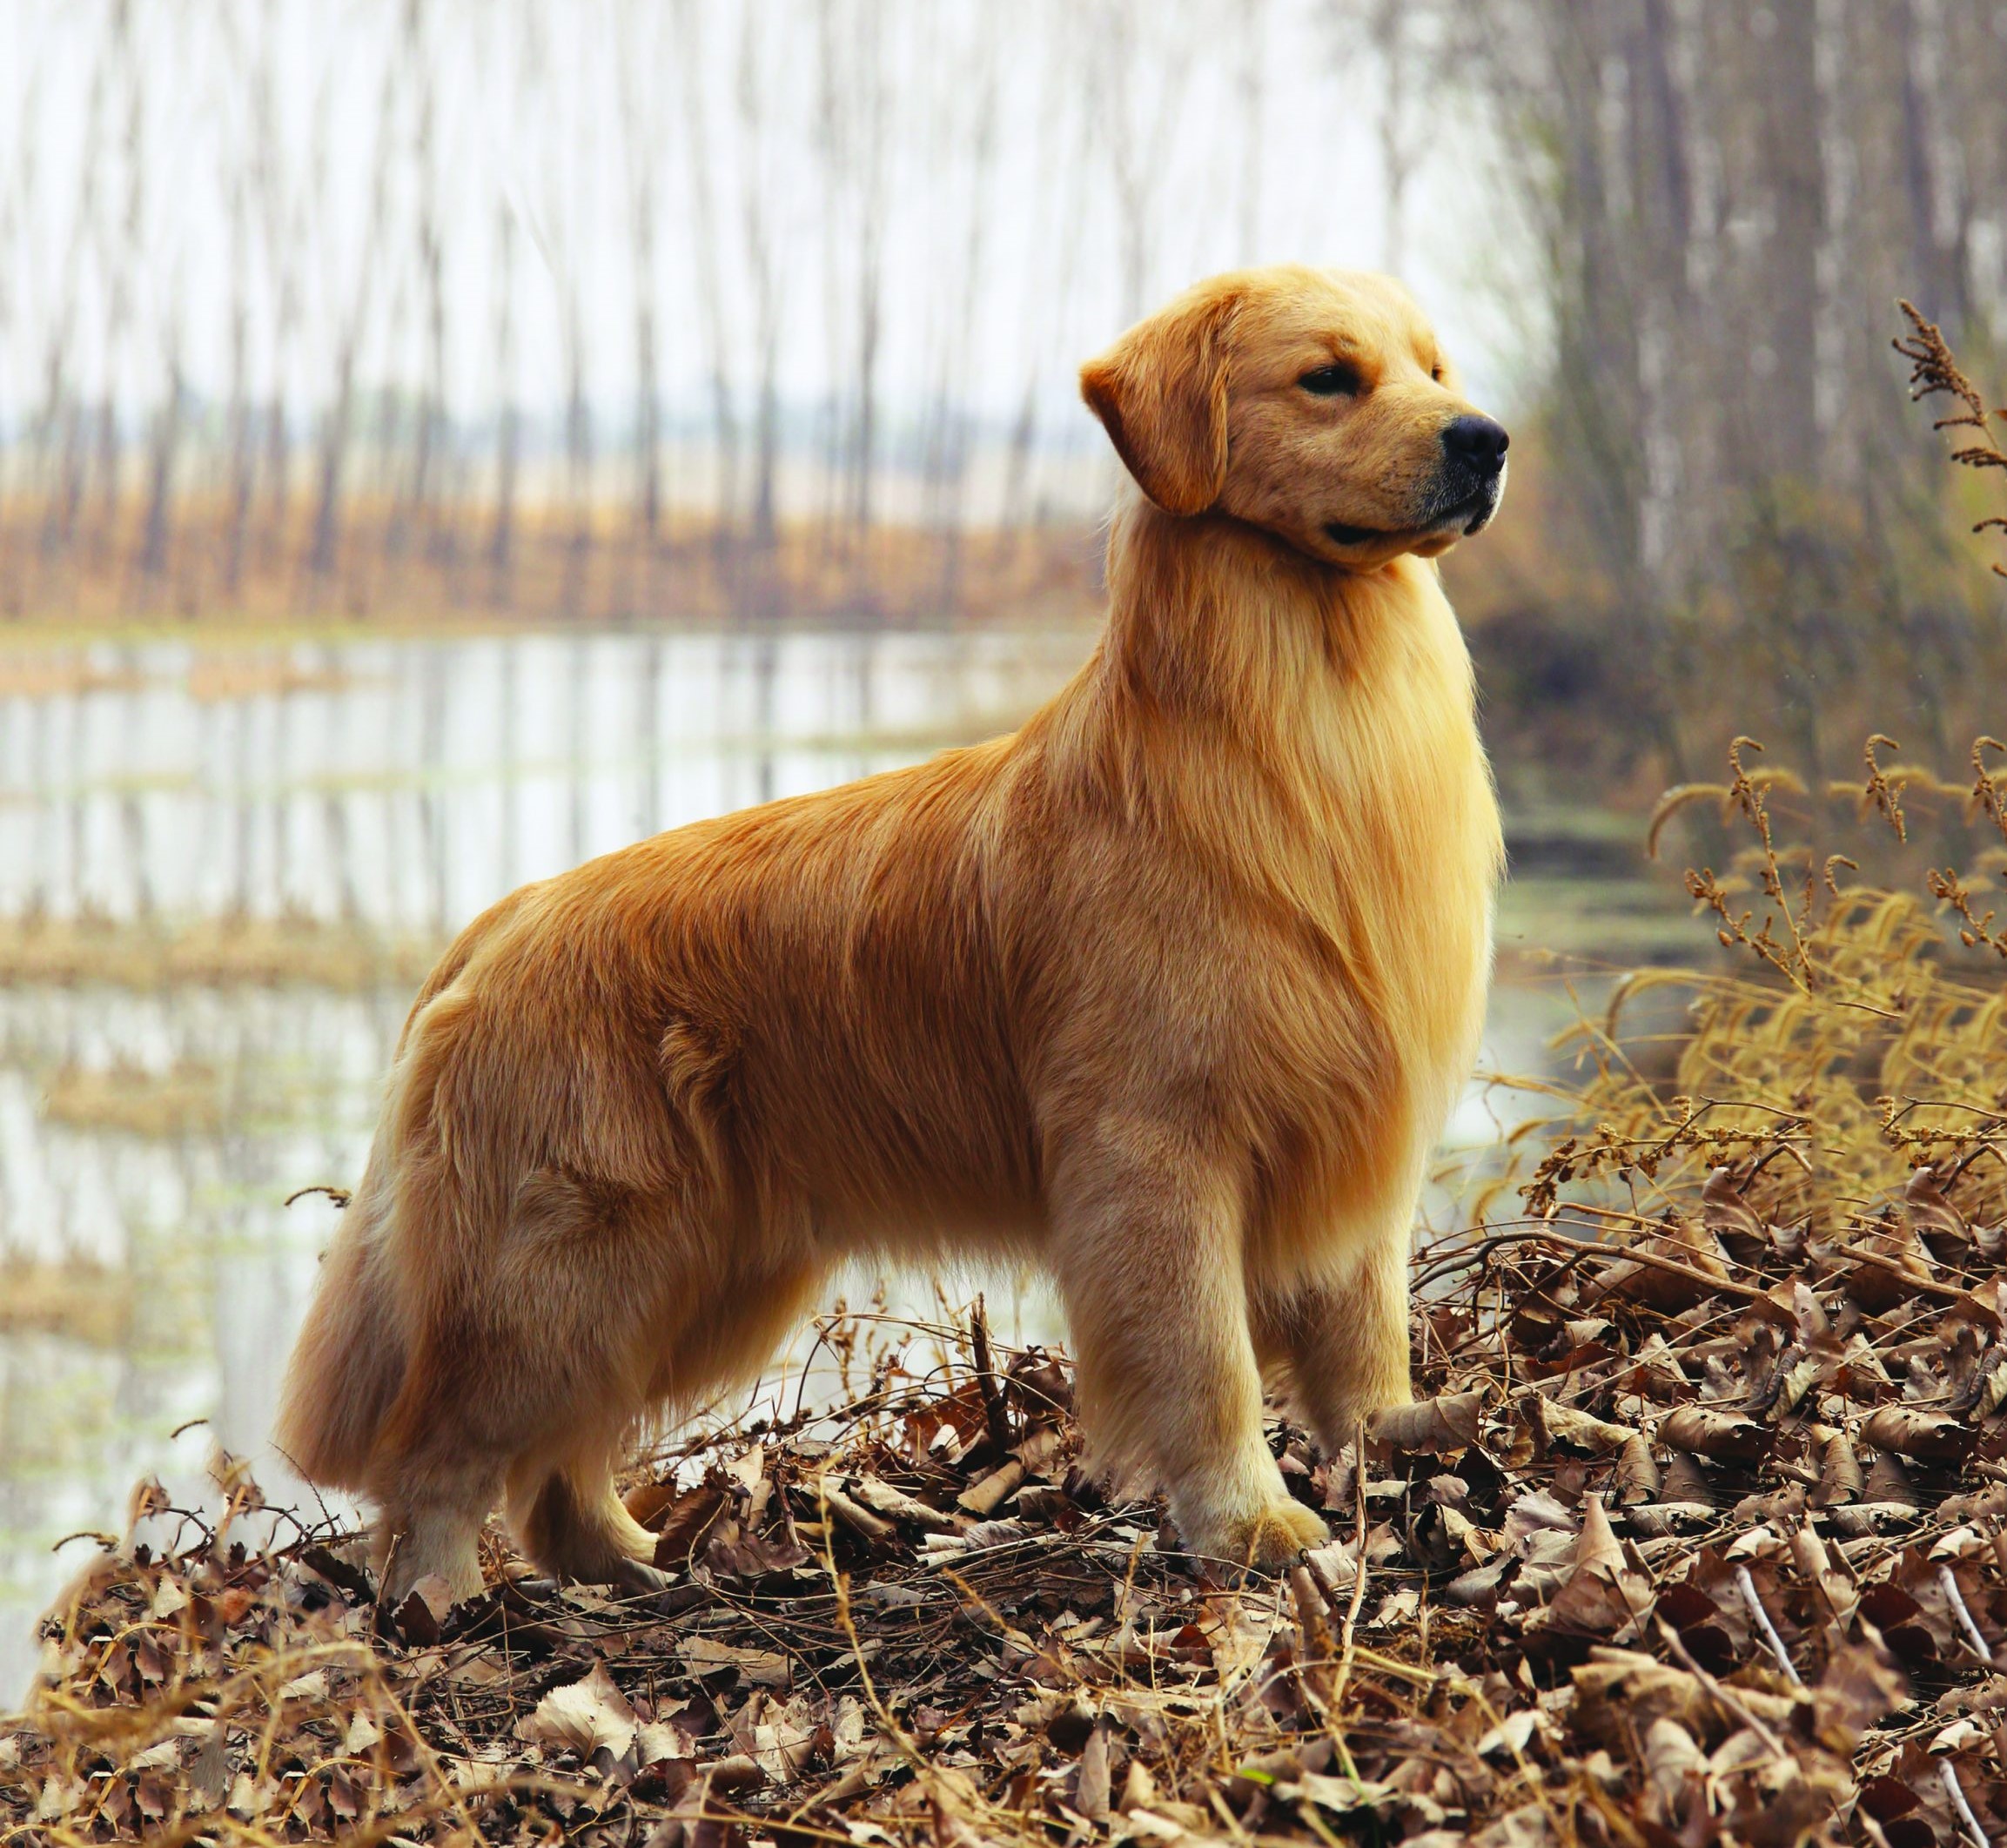 Golden Retriever Facts: 10 Things to Know About These Sporting Dogs